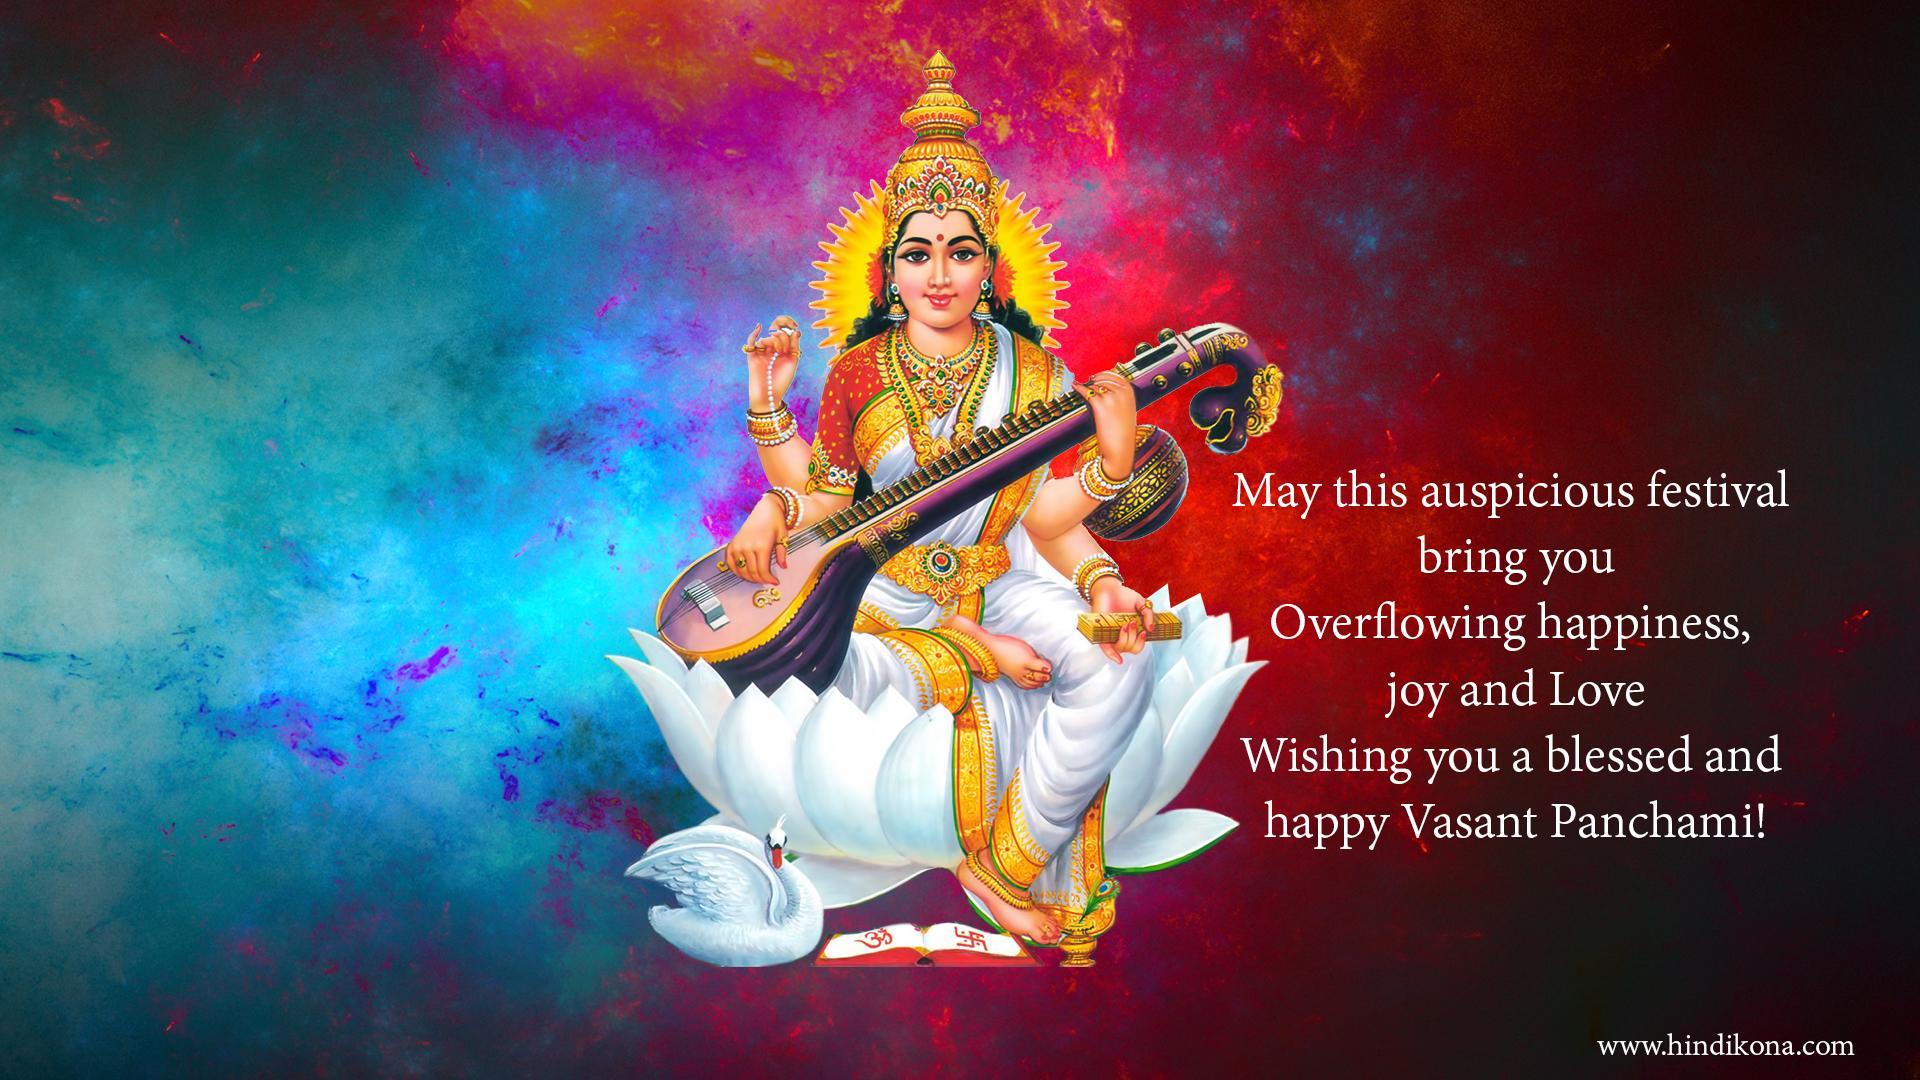 Wishing You A Blessed And Happy Basant Panchami